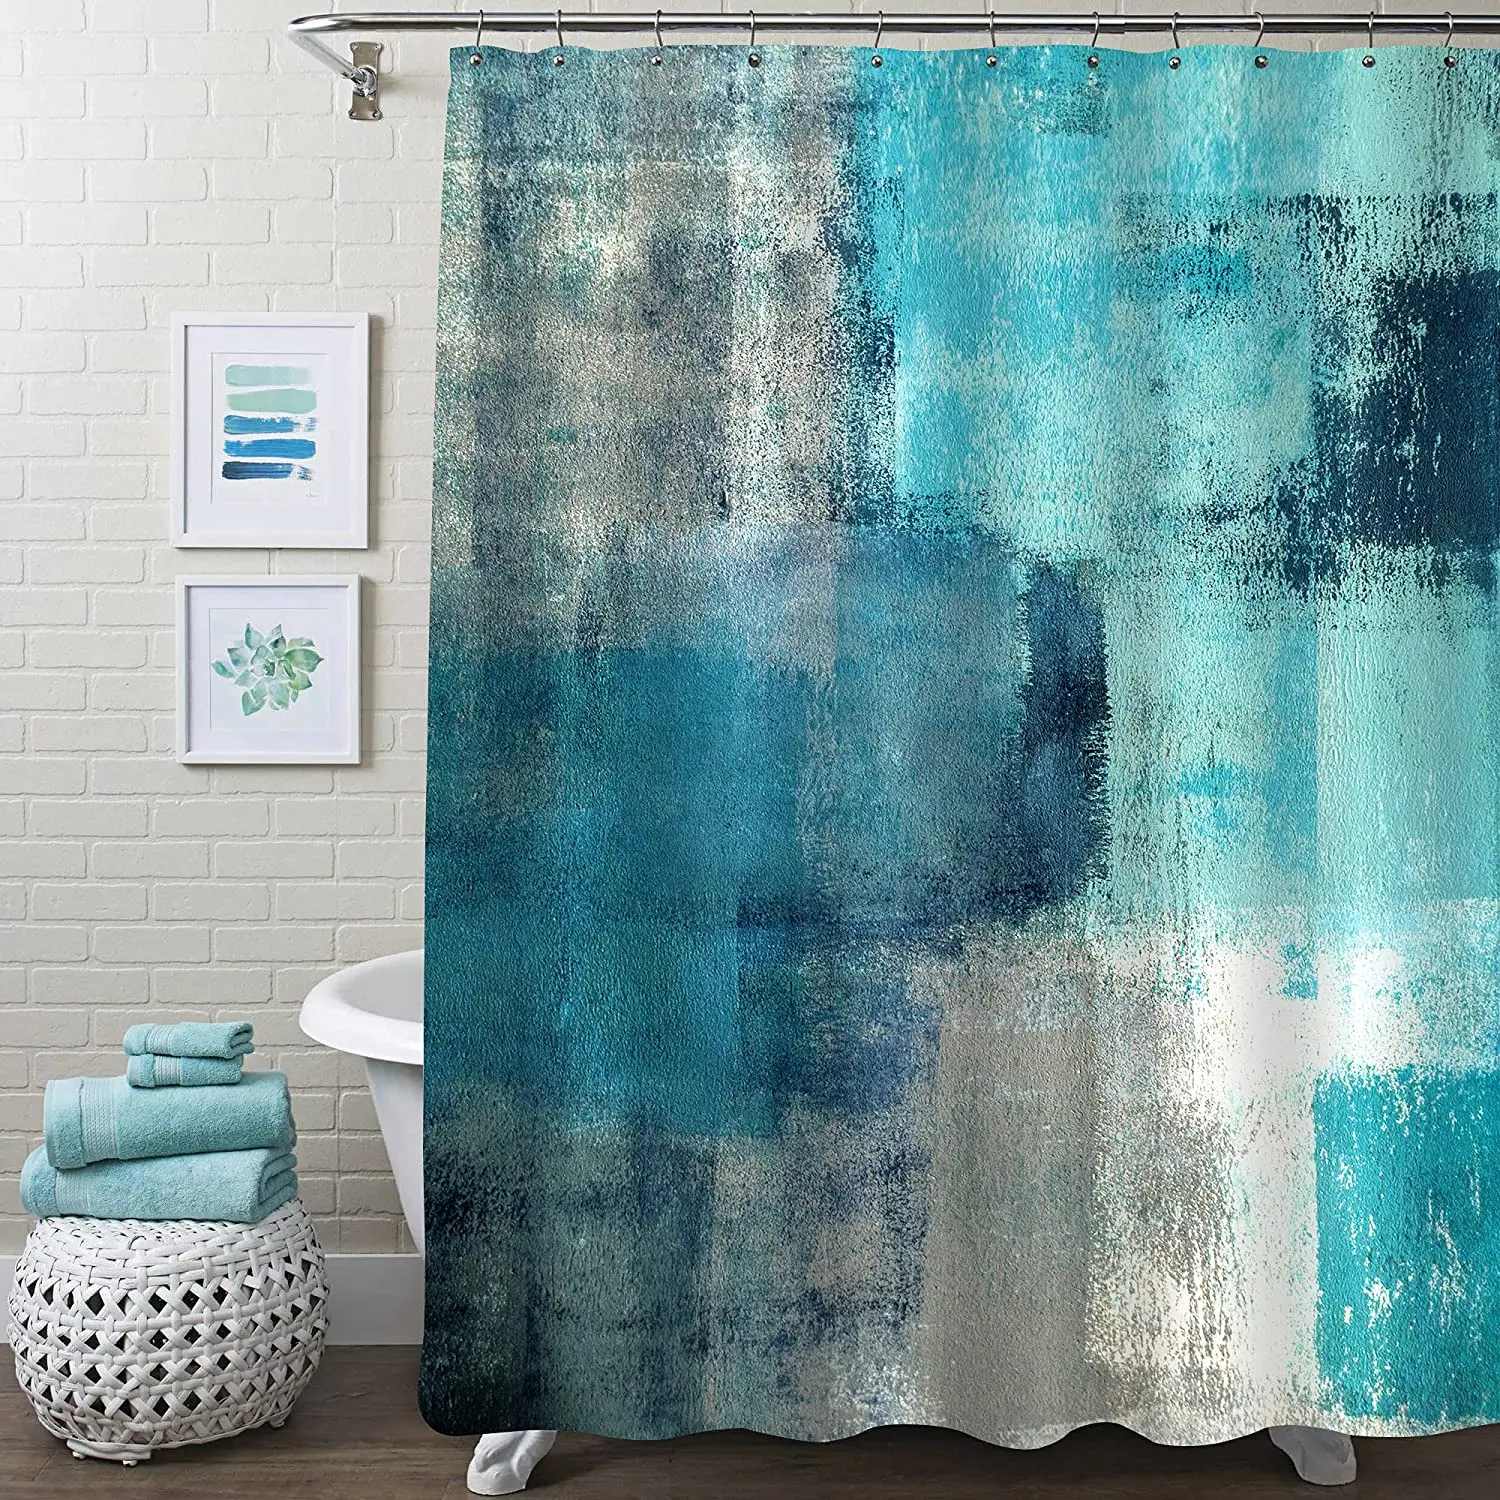 Blue Green Shower Curtain Liner Turquoise Fabric For Bathroom Decor Abstract Grunge Paint Brush